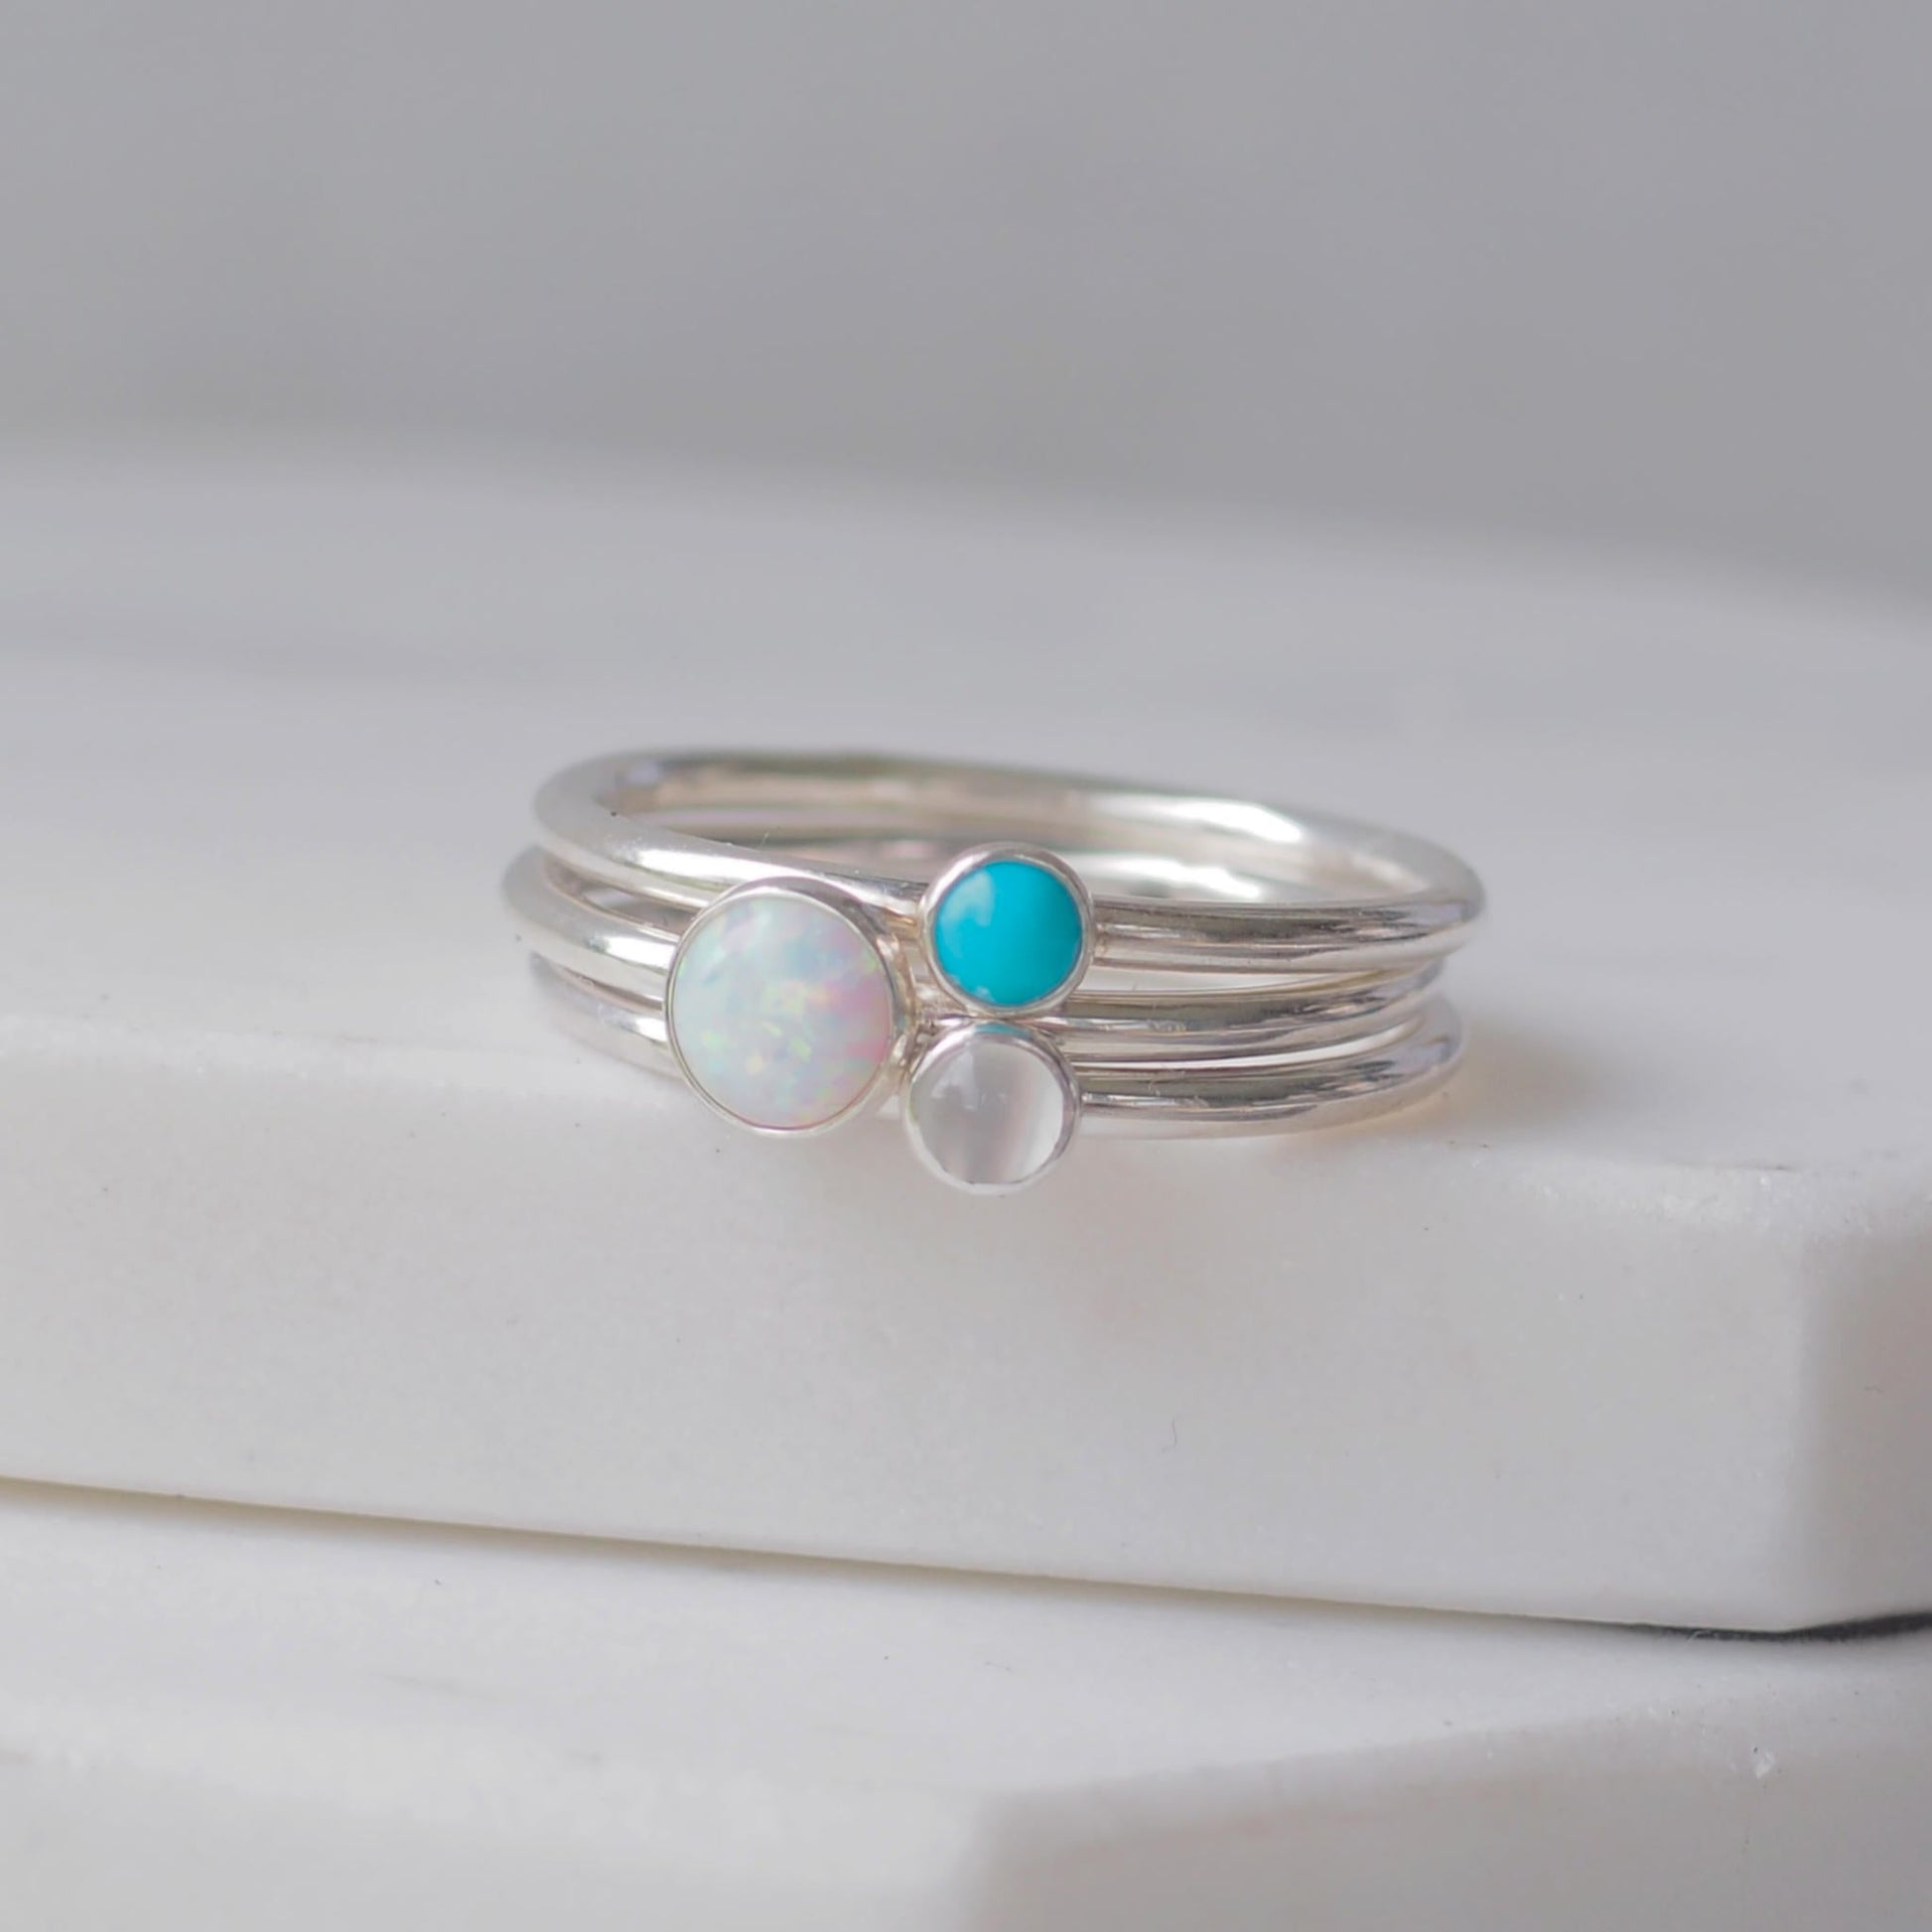 Three silver rings with lal Opal Turquoise and Moonstone gemstones. Birthstones for June, December and October. Handmade to your ring size by maram jewellery in Scotland , UK